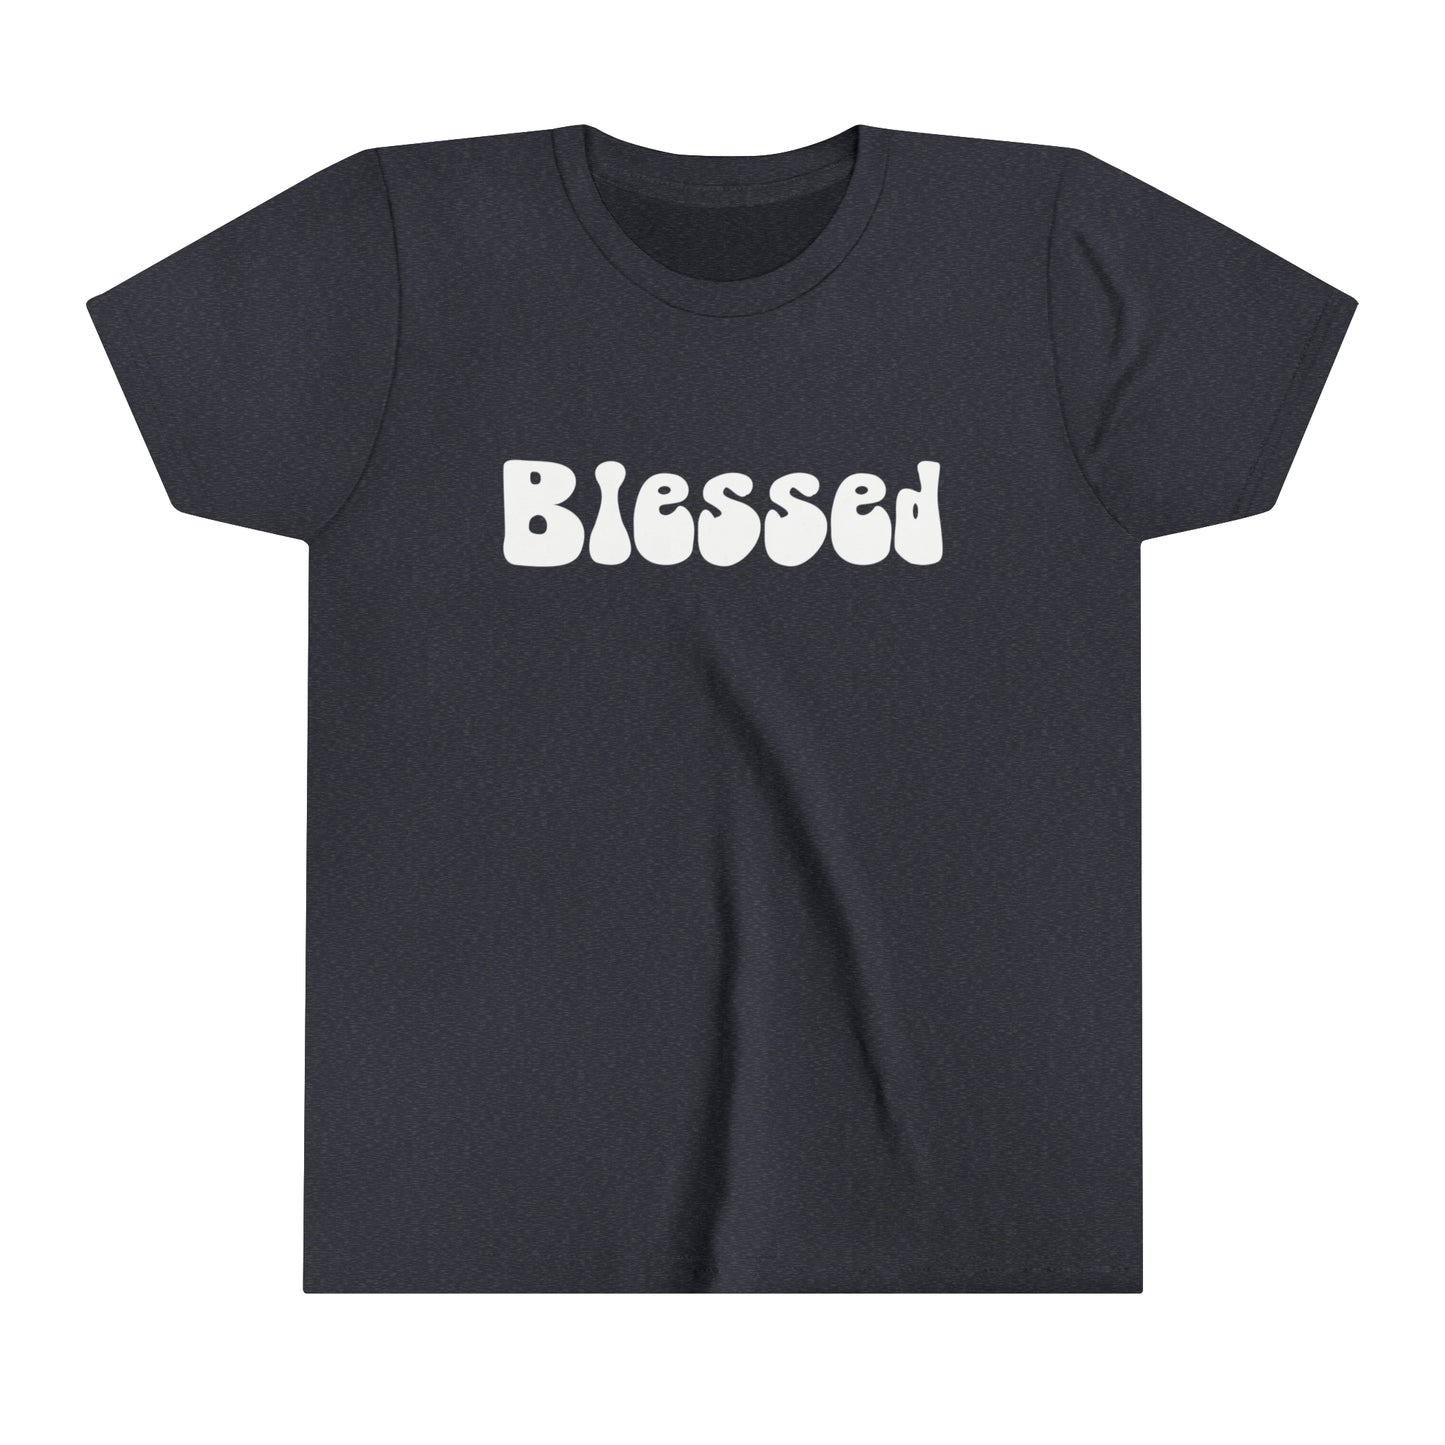 Groovy Blessed T-Shirt - Youth